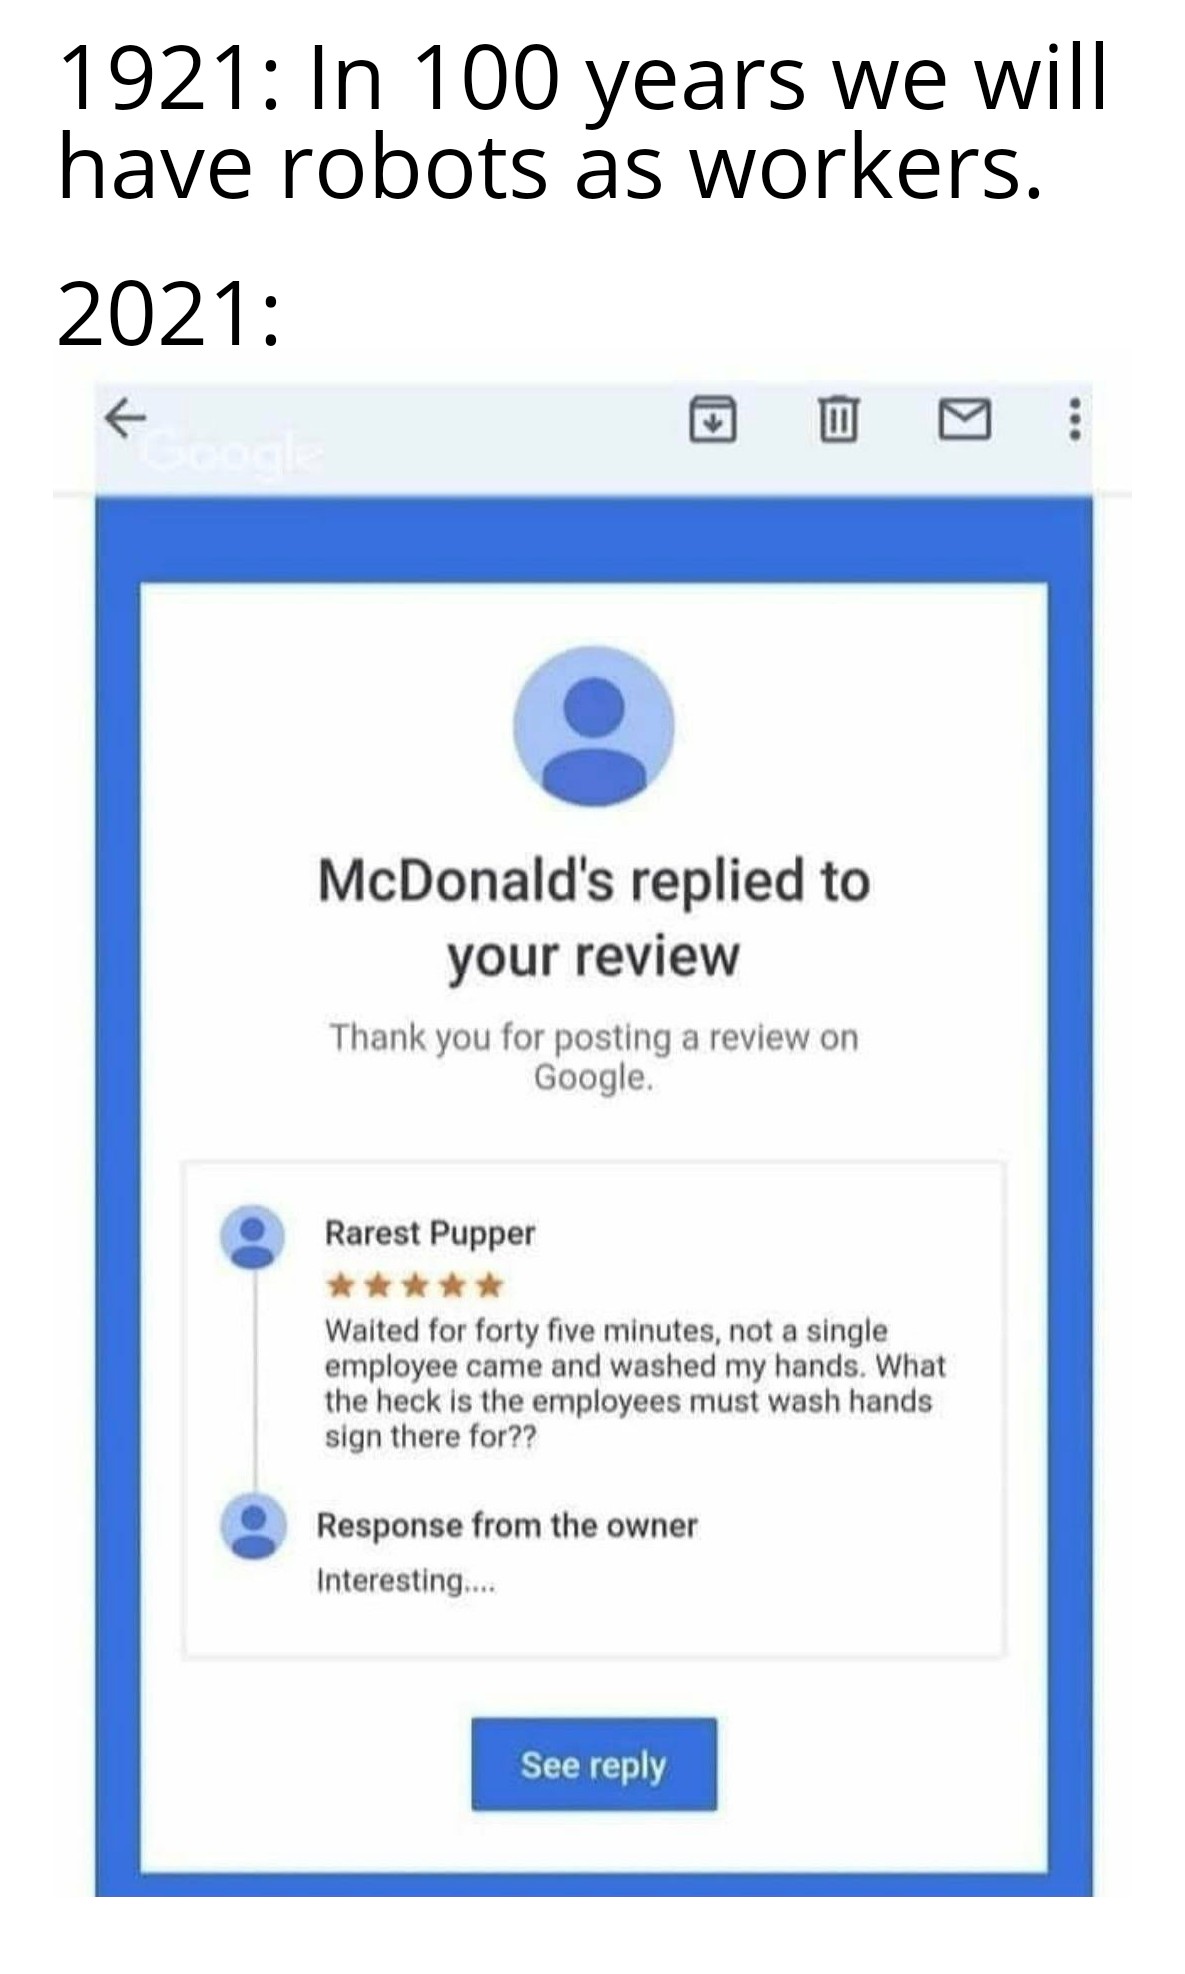 web page - 1921 In 100 years we will have robots as workers. 2021 M McDonald's replied to your review Thank you for posting a review on Google. Rarest Pupper Waited for forty five minutes, not a single employee came and washed my hands. What the heck is t